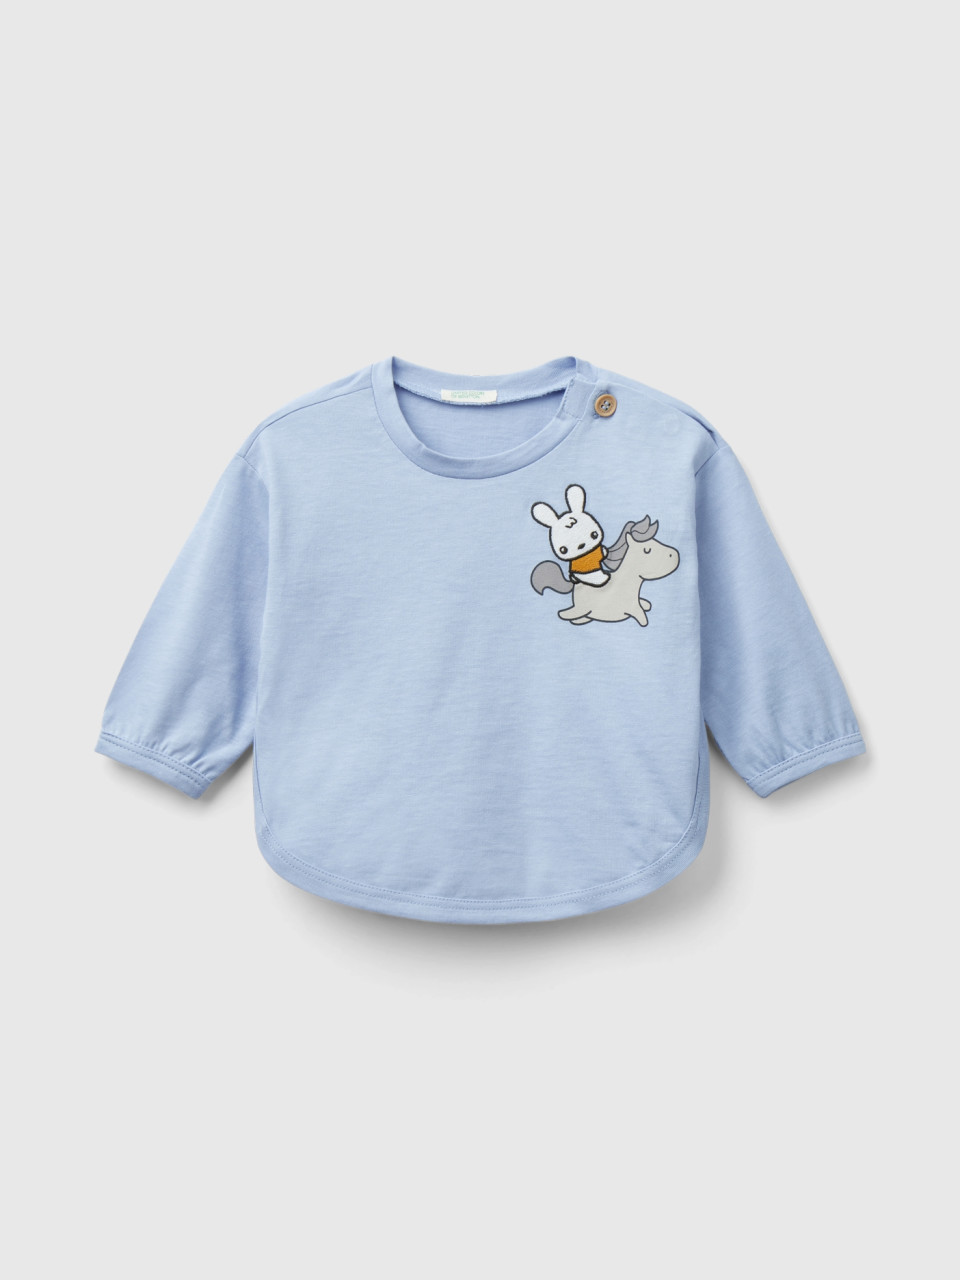 Benetton, T-shirt In Organic Cotton With Print, Sky Blue, Kids